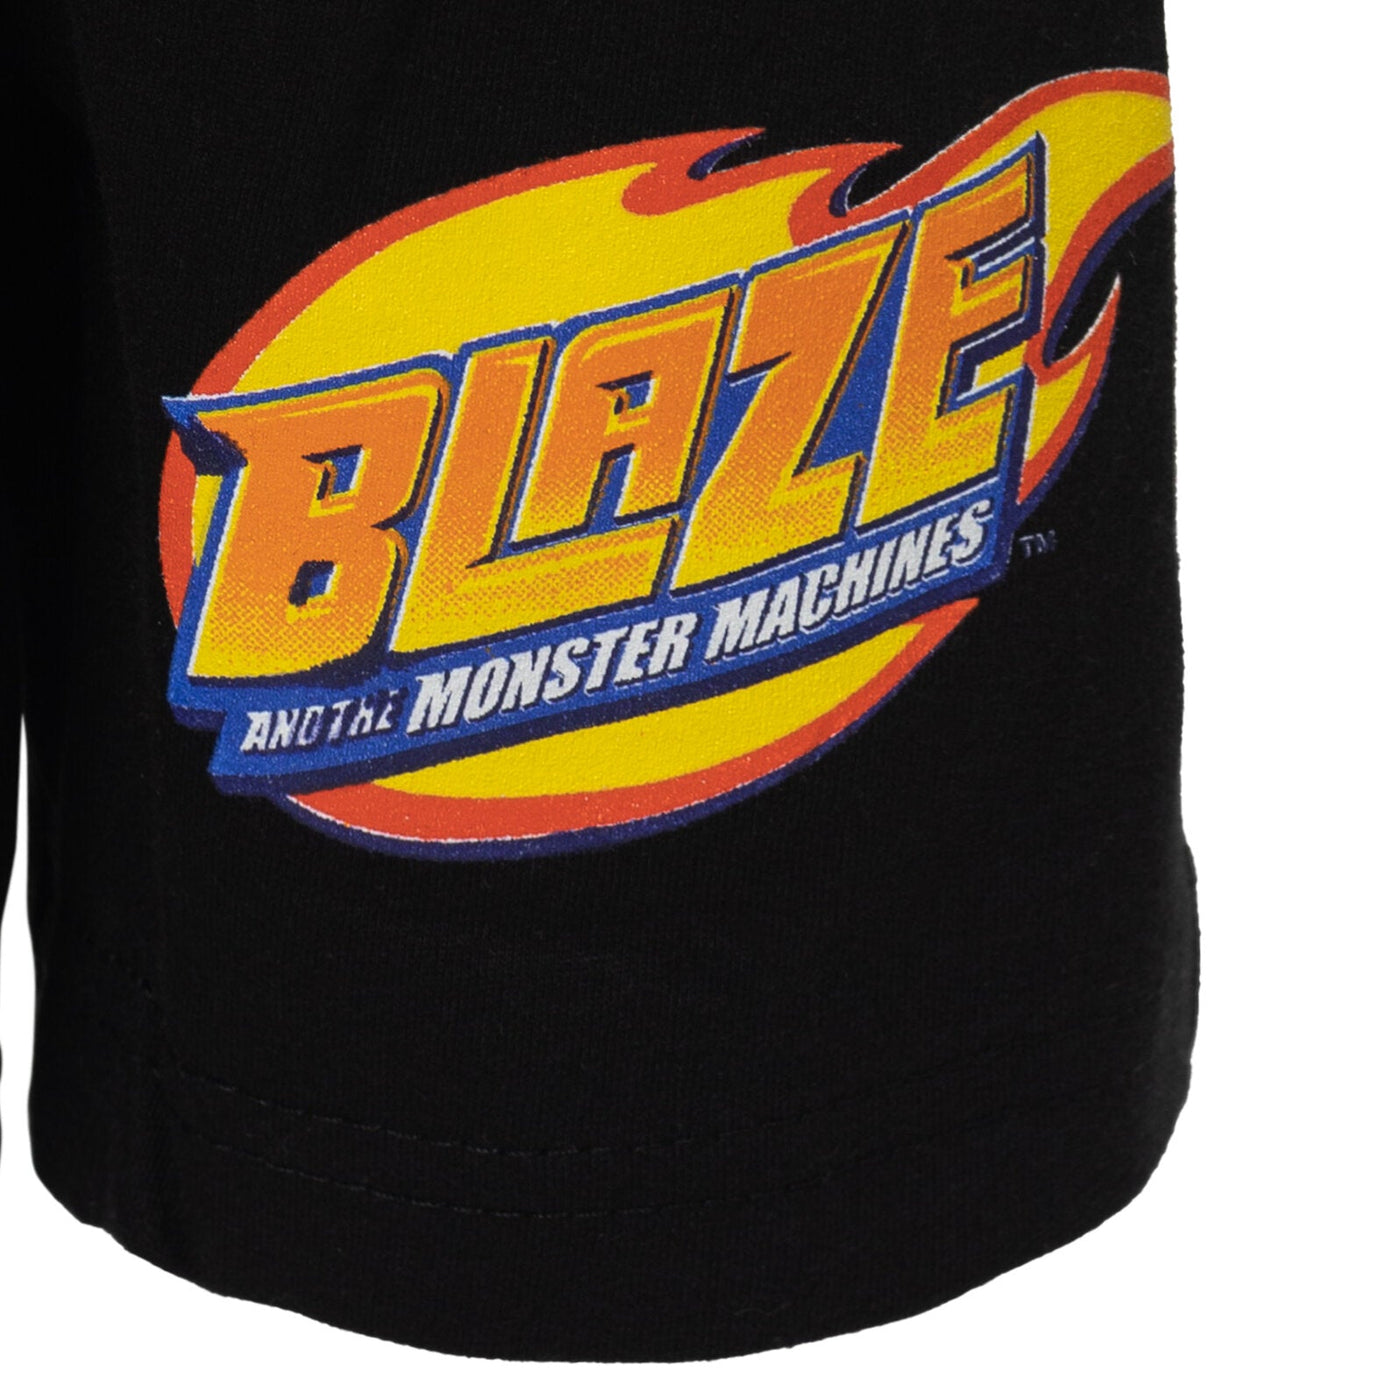 Blaze and the Monster Machines Pullover T-Shirt Tank Top and Bike Shorts French Terry 3 Piece Outfit Set - imagikids